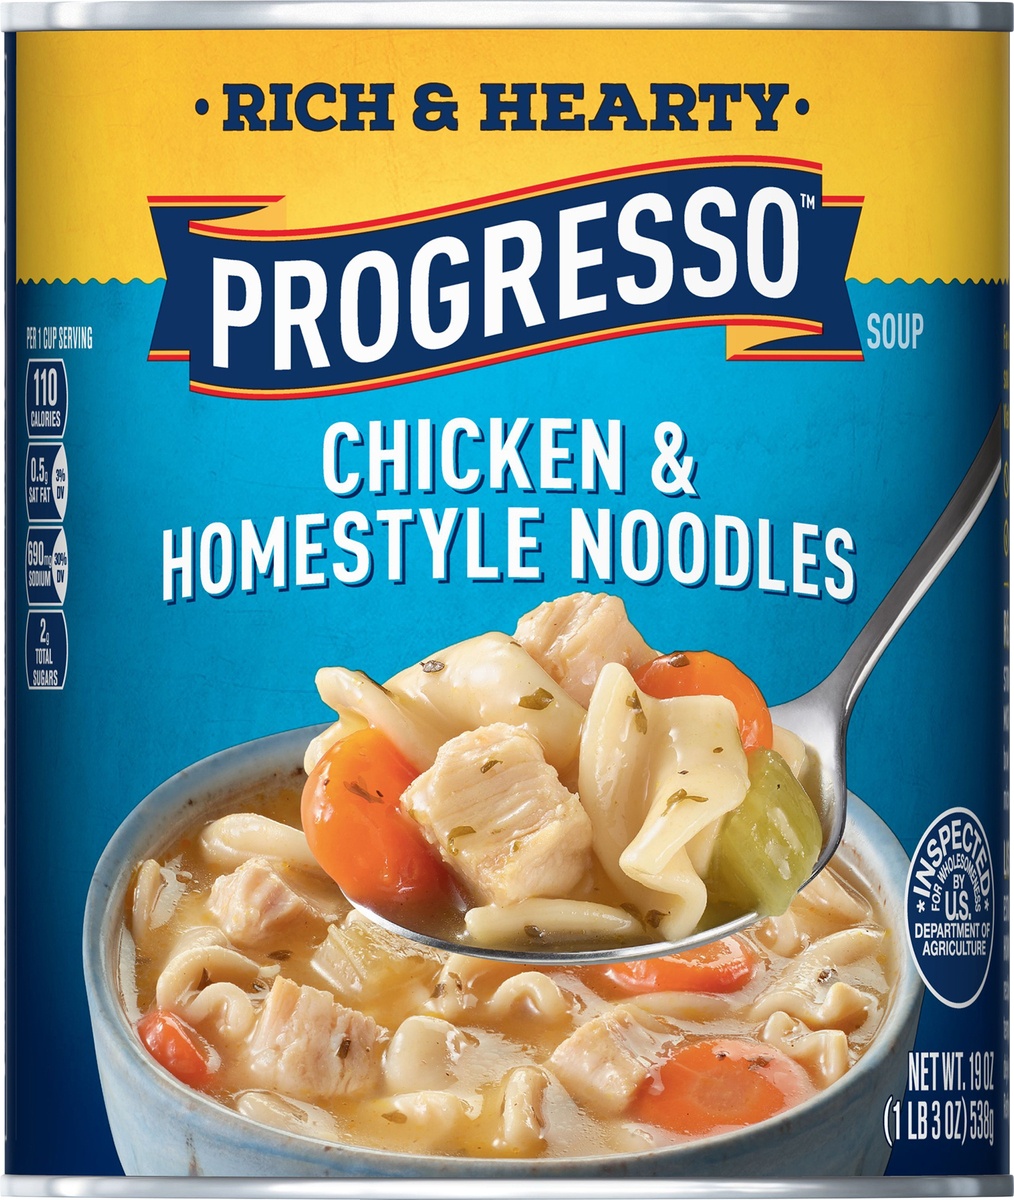 slide 9 of 11, Progresso Rich & Hearty Chicken & Homestyle Noodles SoupCan, 19 oz